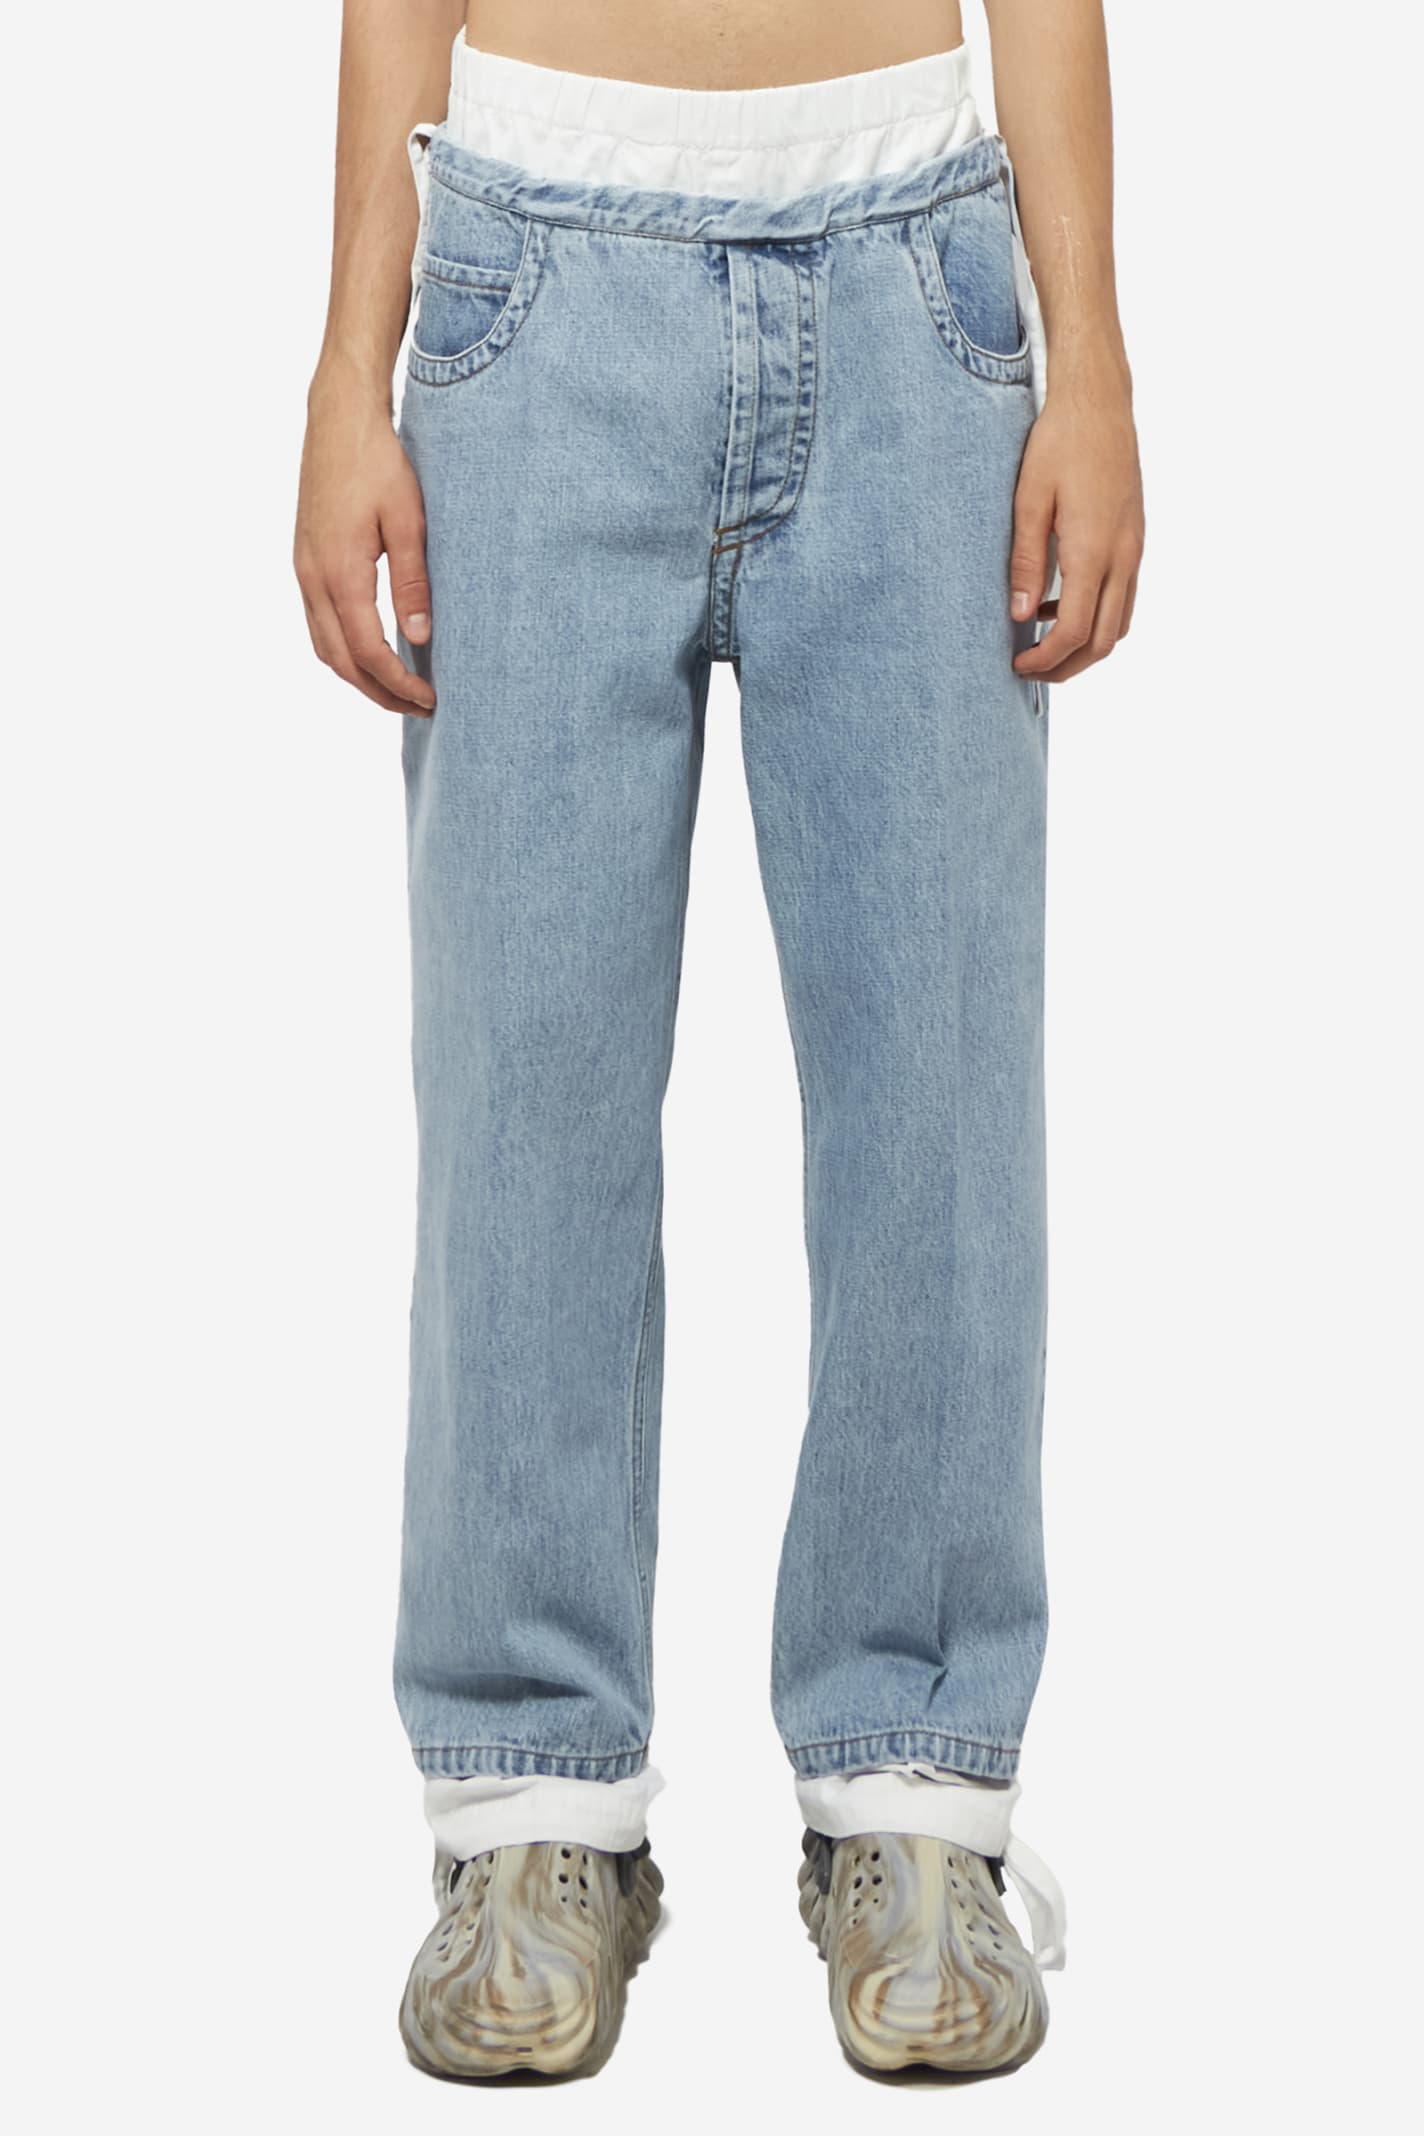 CRAIG GREEN CROPPED BOW JEANS